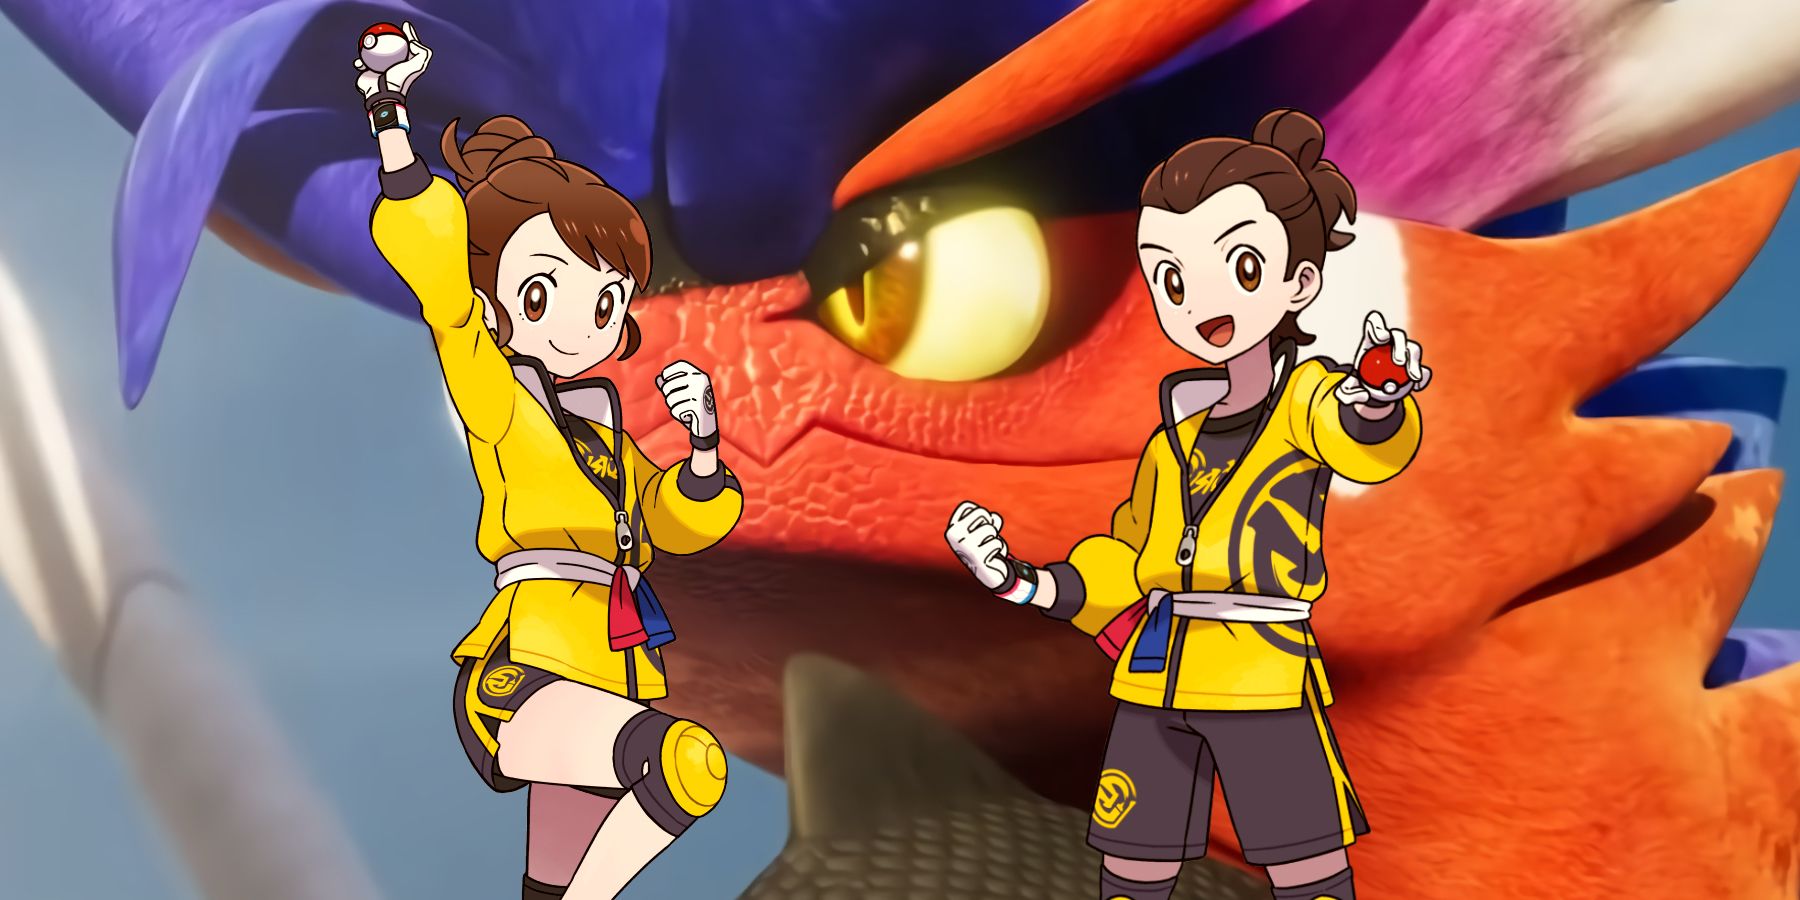 Gloria and Victor, the default main characters from Pokémon Sword and Shield, wearing their Isle of Armor DLC outfits in front of a background showing a close up of Pokémon Scarlet's Koraidon.